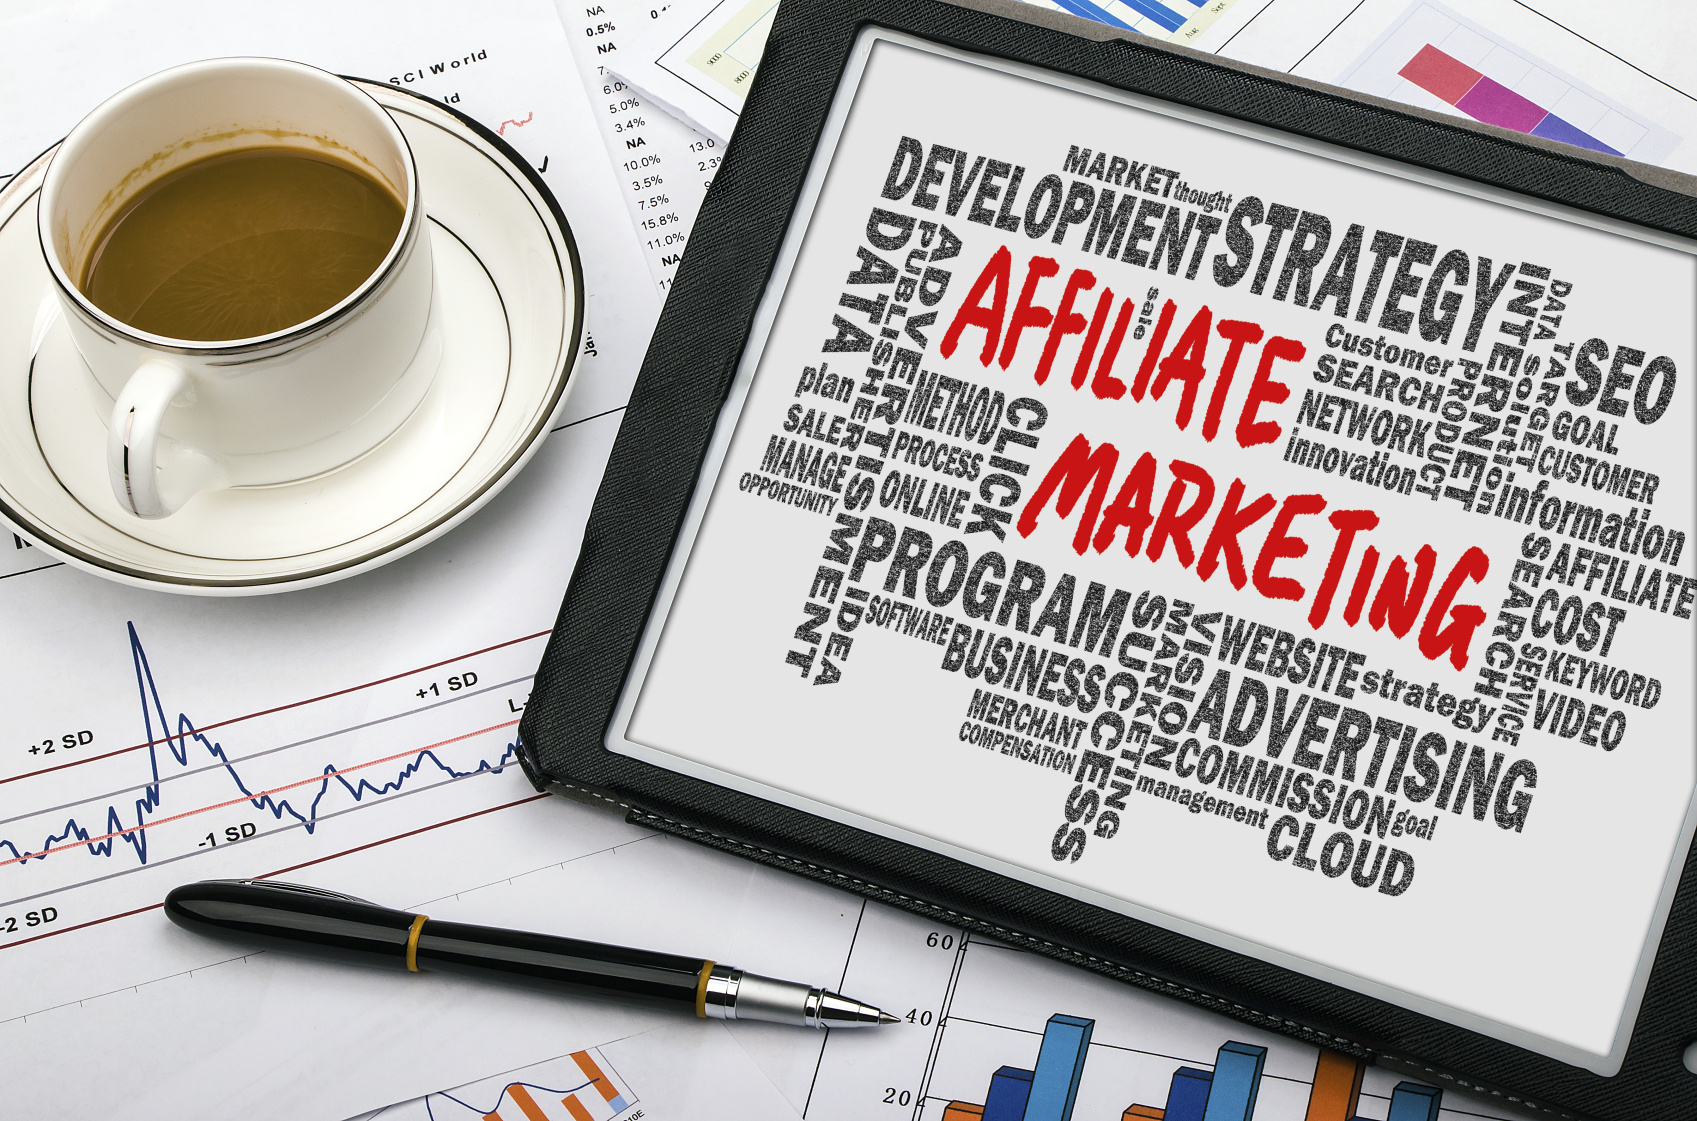 Experience Advertising, Inc. Releases a Complimentary E-Book for Affiliate Marke